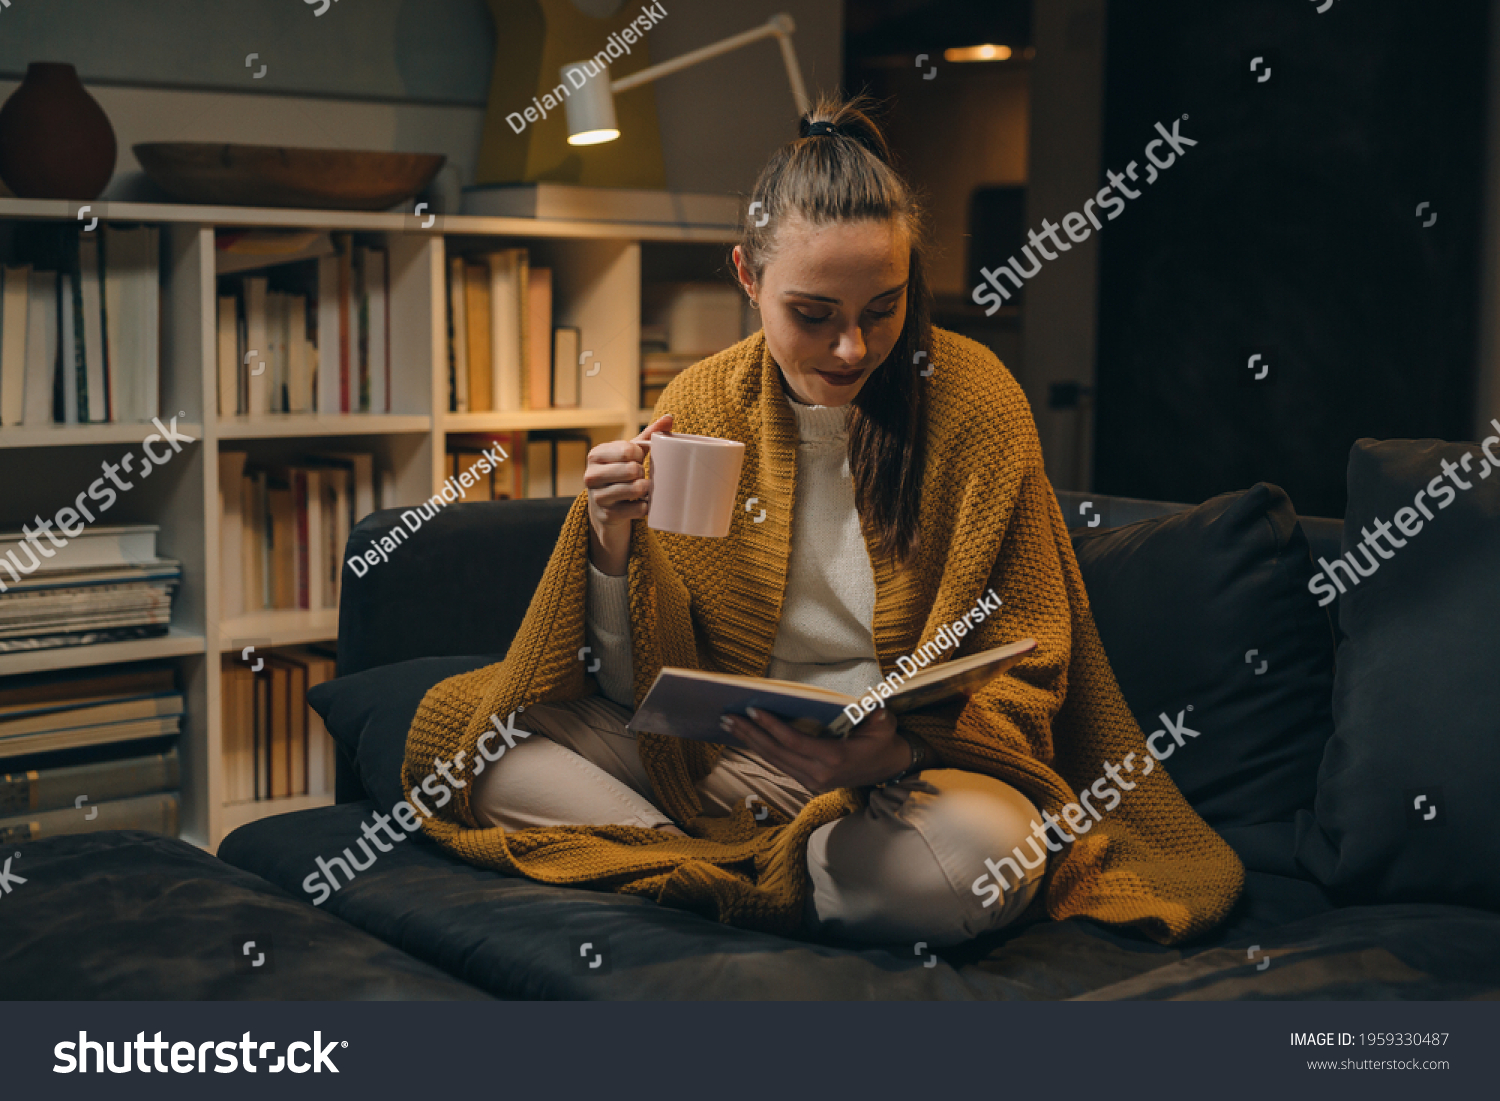 woman reading book and drinking coffee or tea at home #1959330487